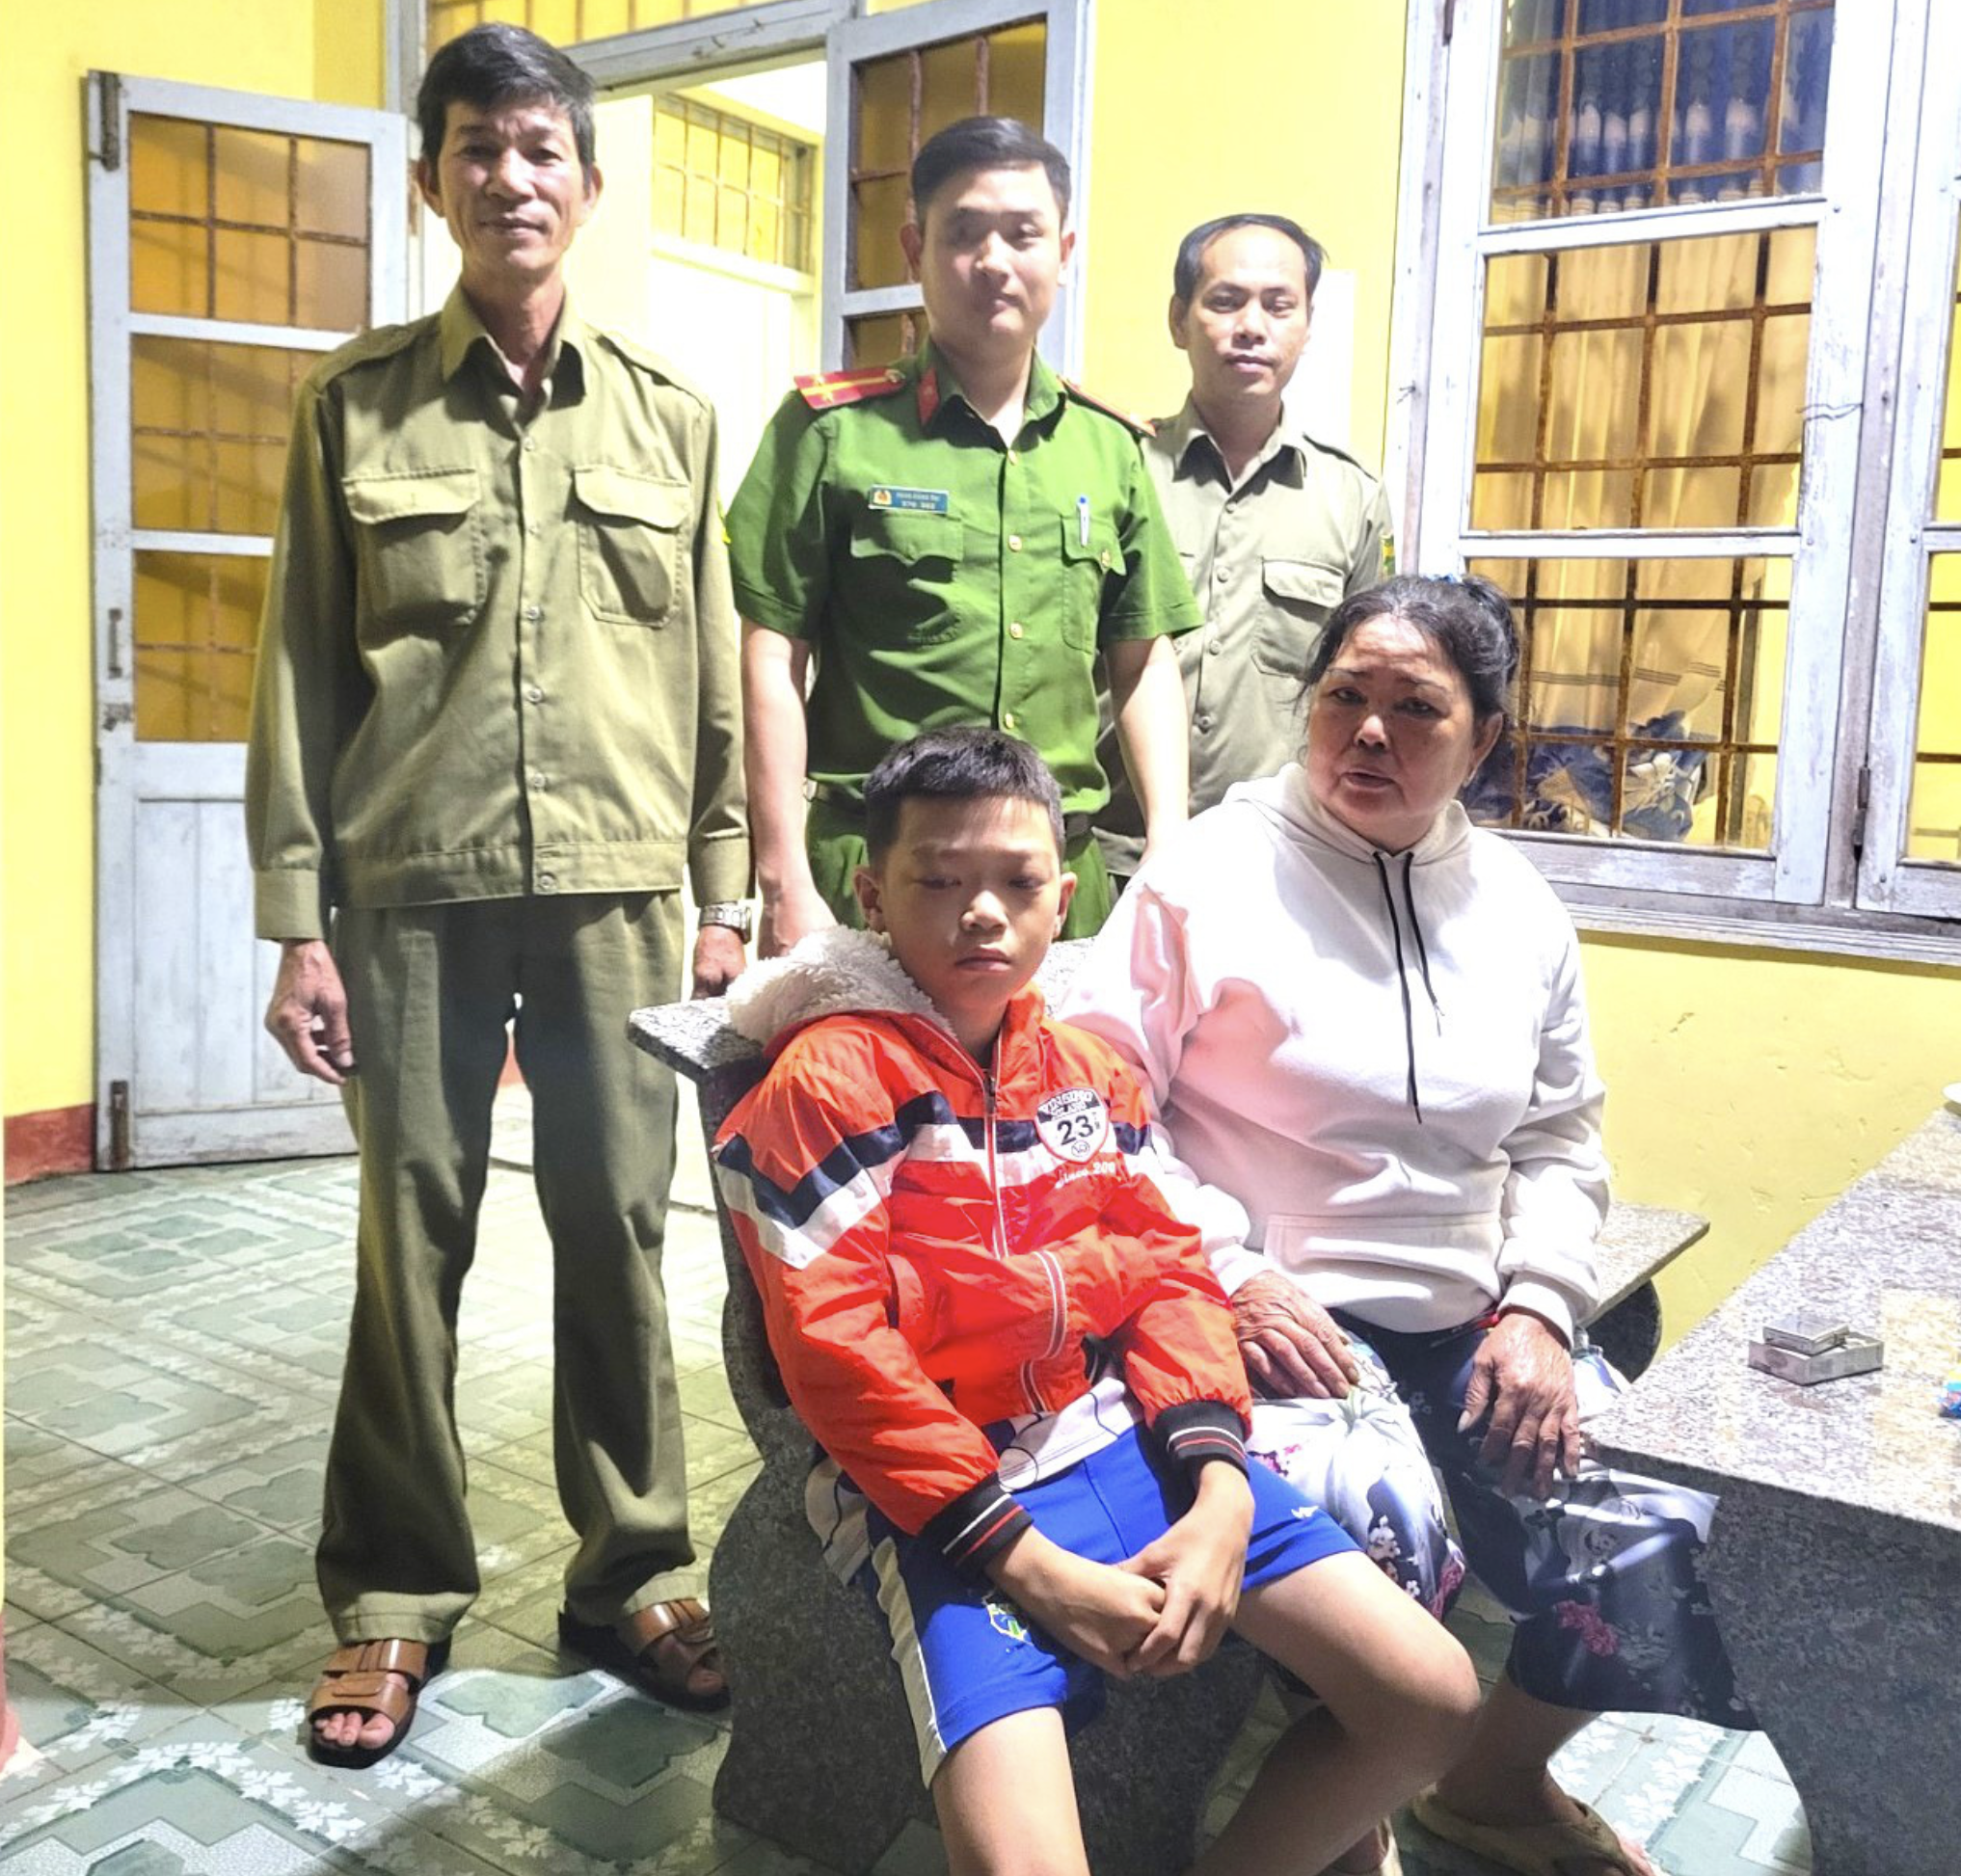 Police officers find a 10-year-old boy cycling from Phu Yen Province, south-central Vietnam, to southern Binh Duong Province to meet his mother. Photo: Supplied